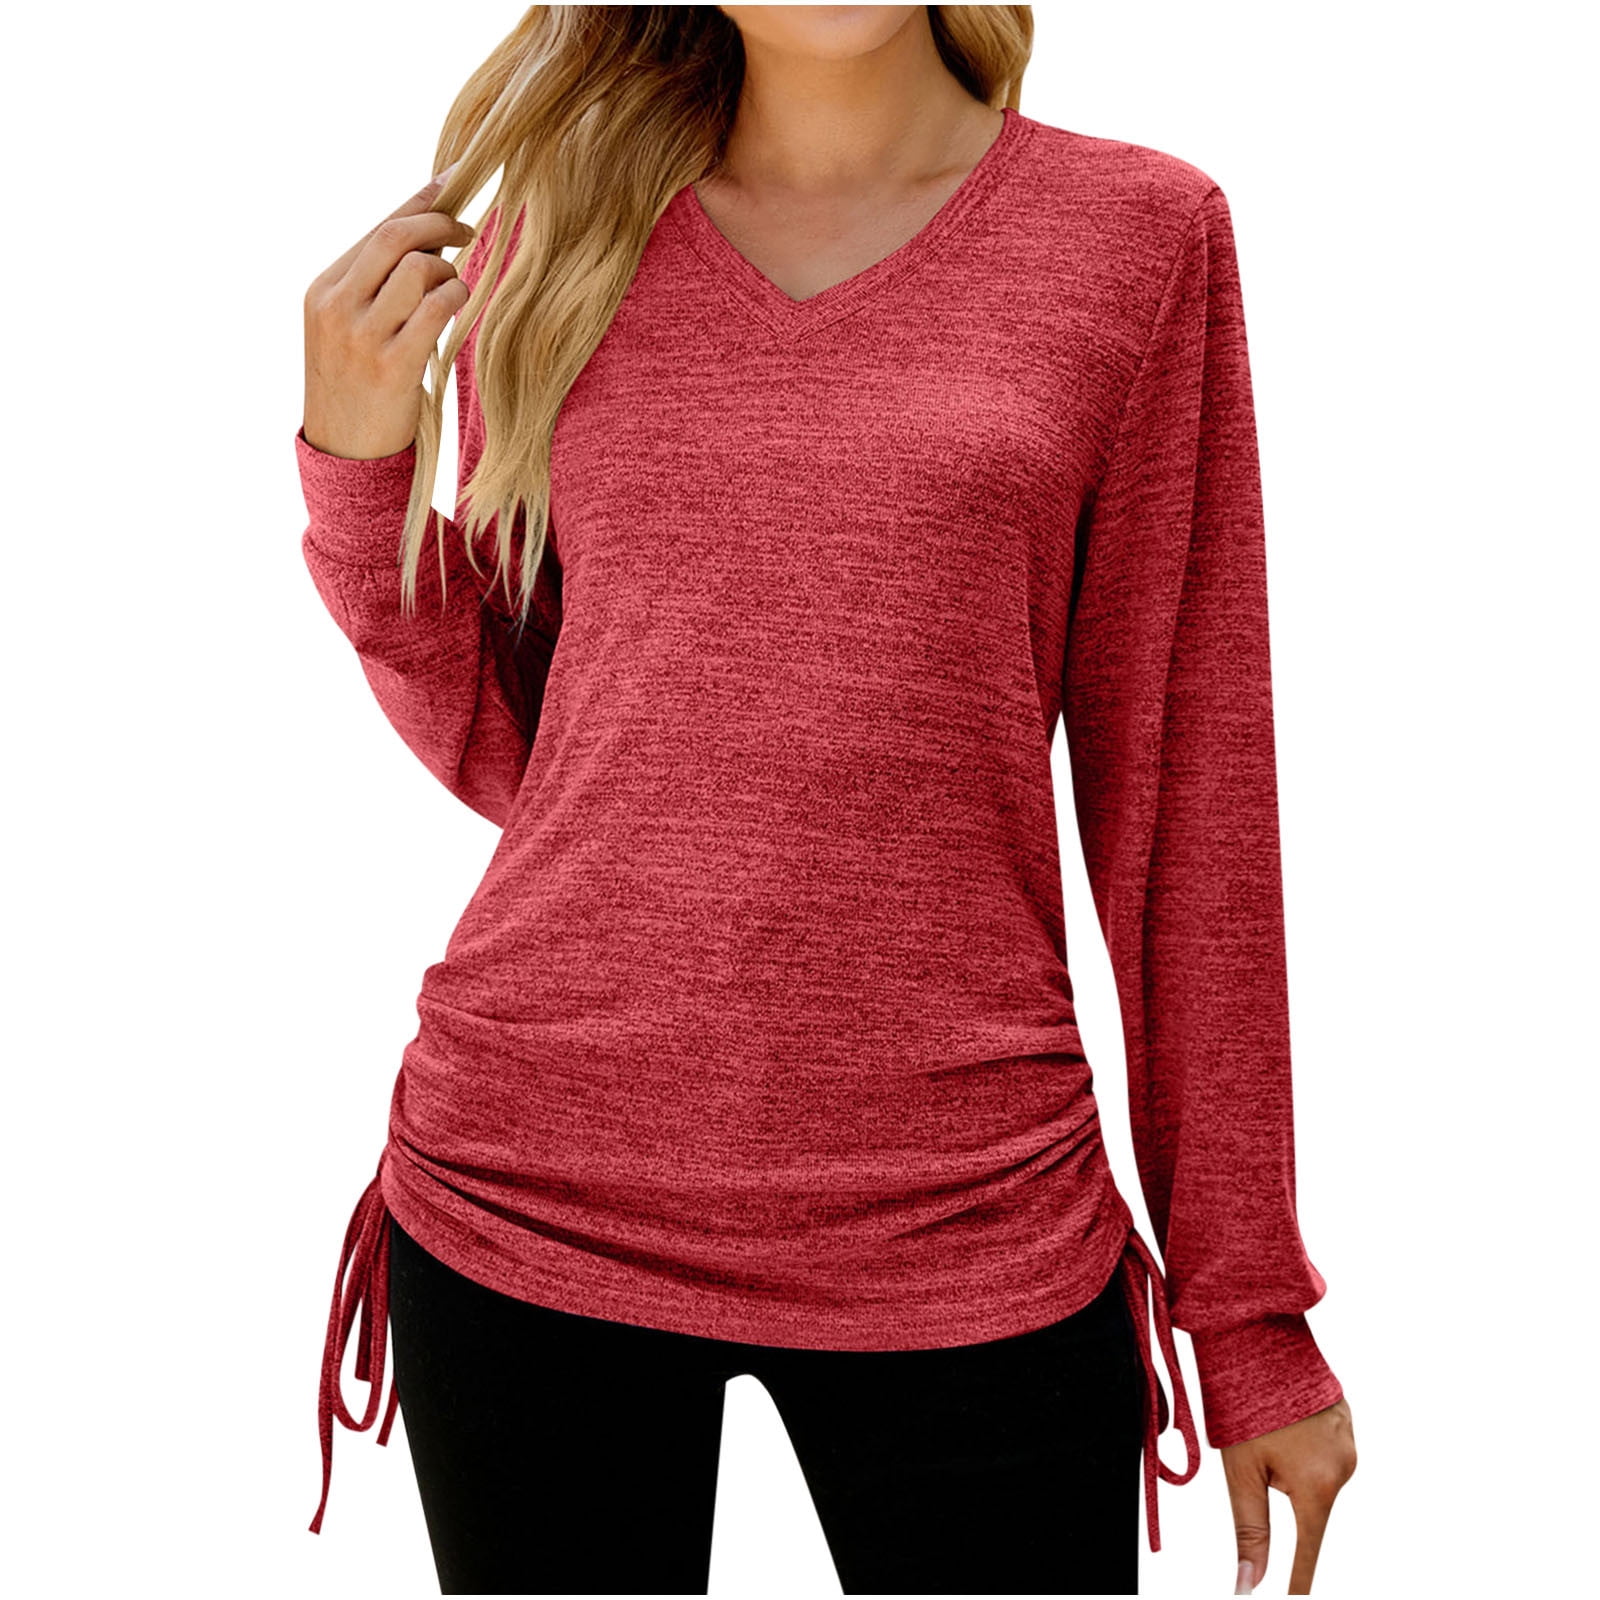 Solid Color V Neck T Shirts for Women Women's Casual V-Neck 3/4 Sleeve  Solid Waist T-Shirt Blouse Tops Long Sleeves Top Long Sleeve Hoodie  Sweatshirt Pullover Tops Blouse 